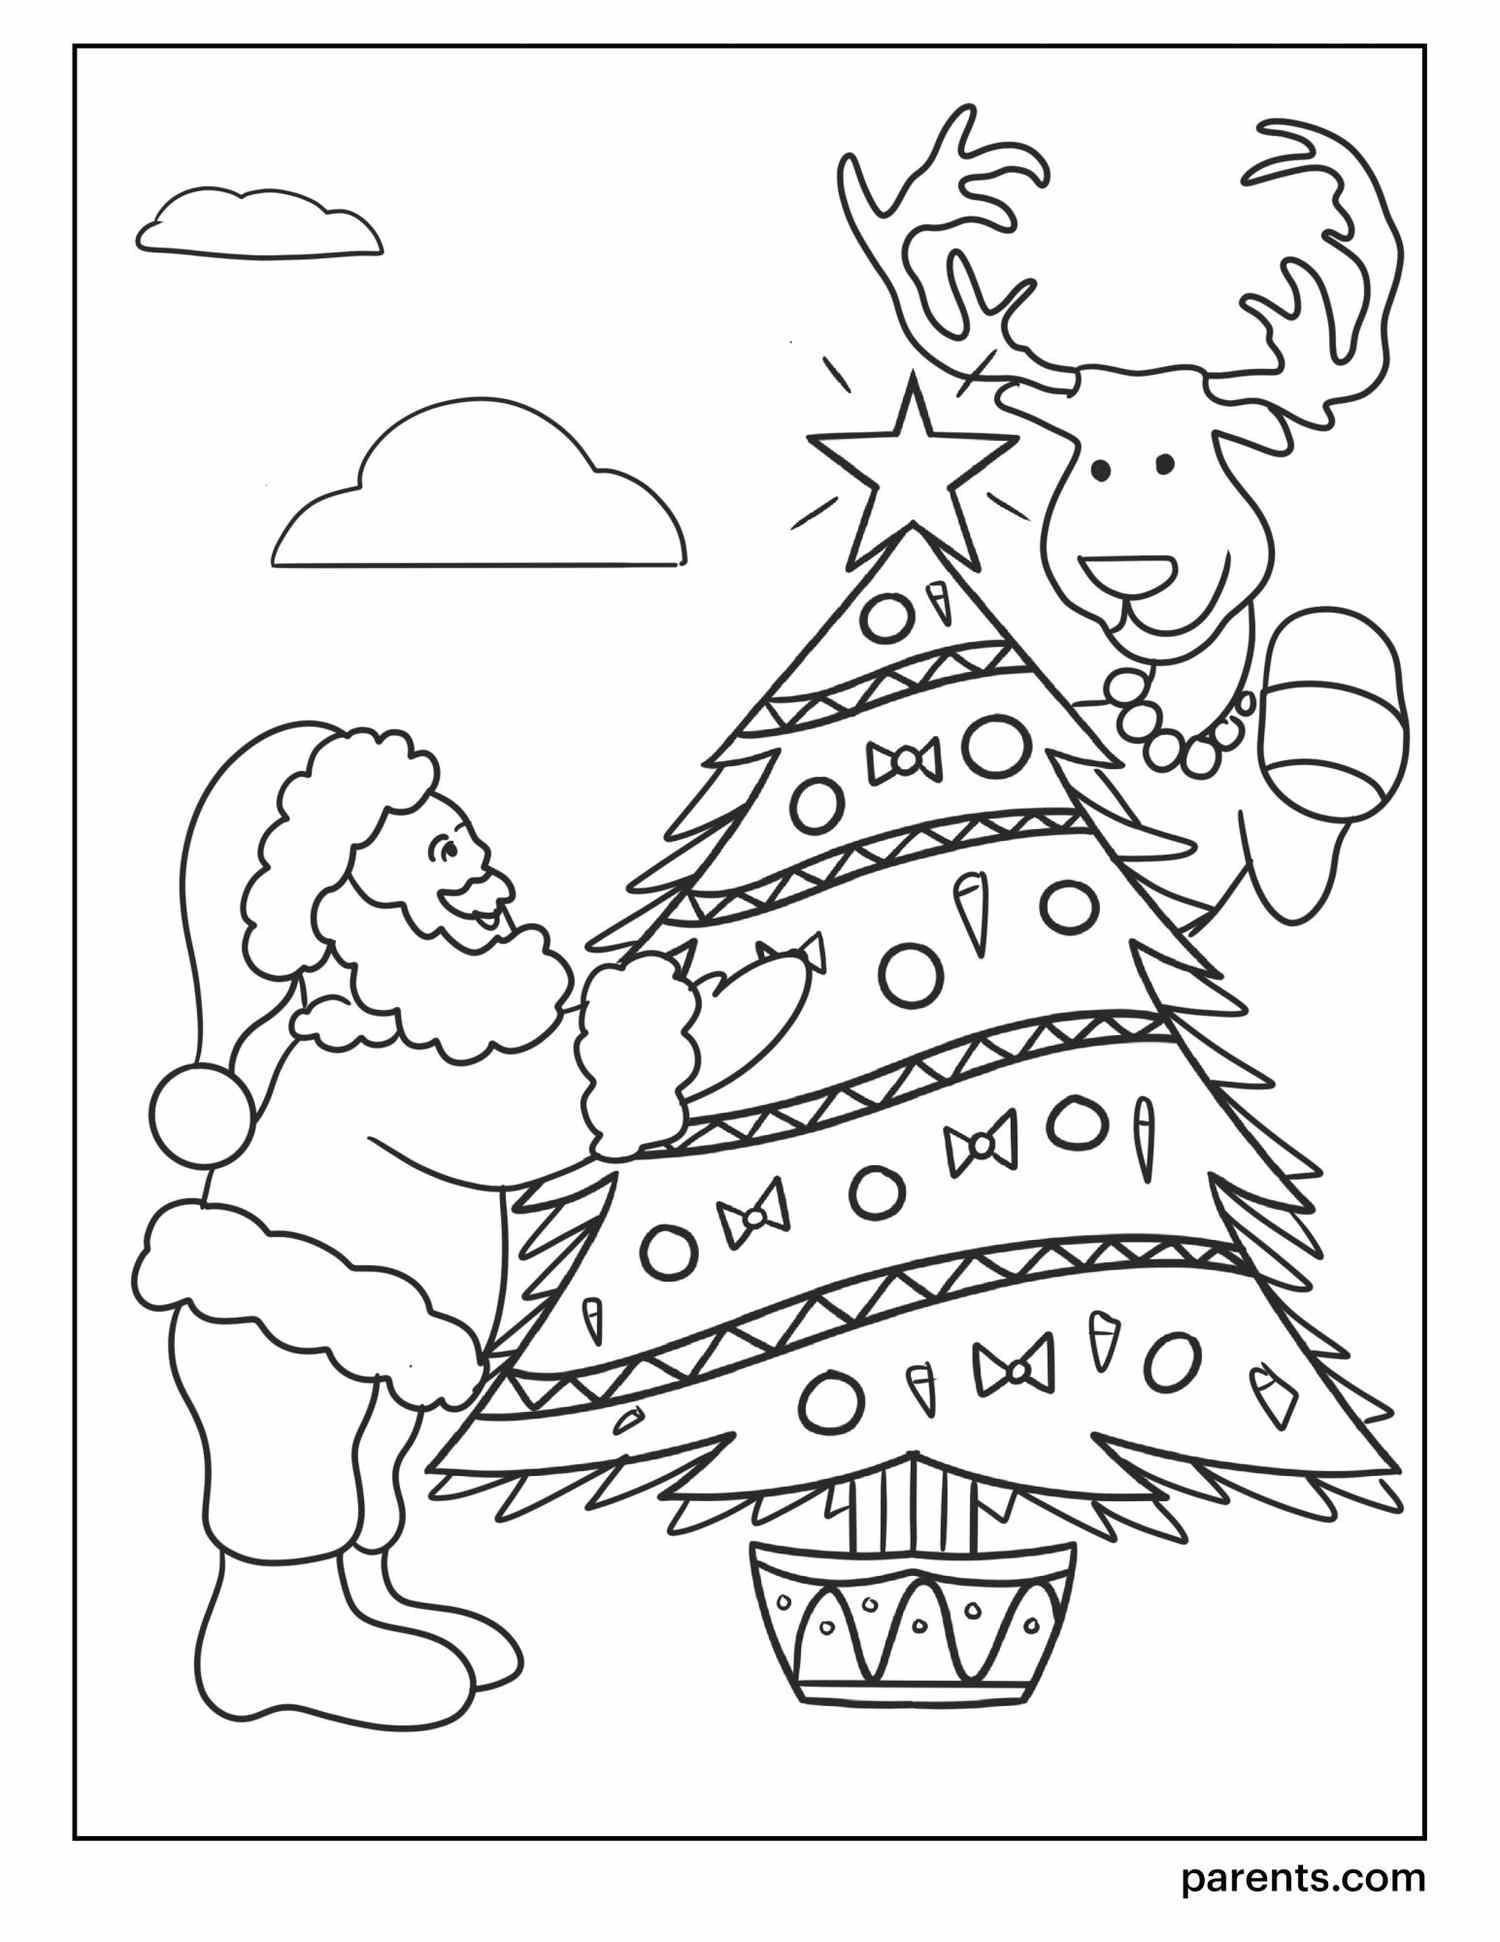 20 Christmas Tree Coloring Pages to Get Kids in the Holiday Spirit ...